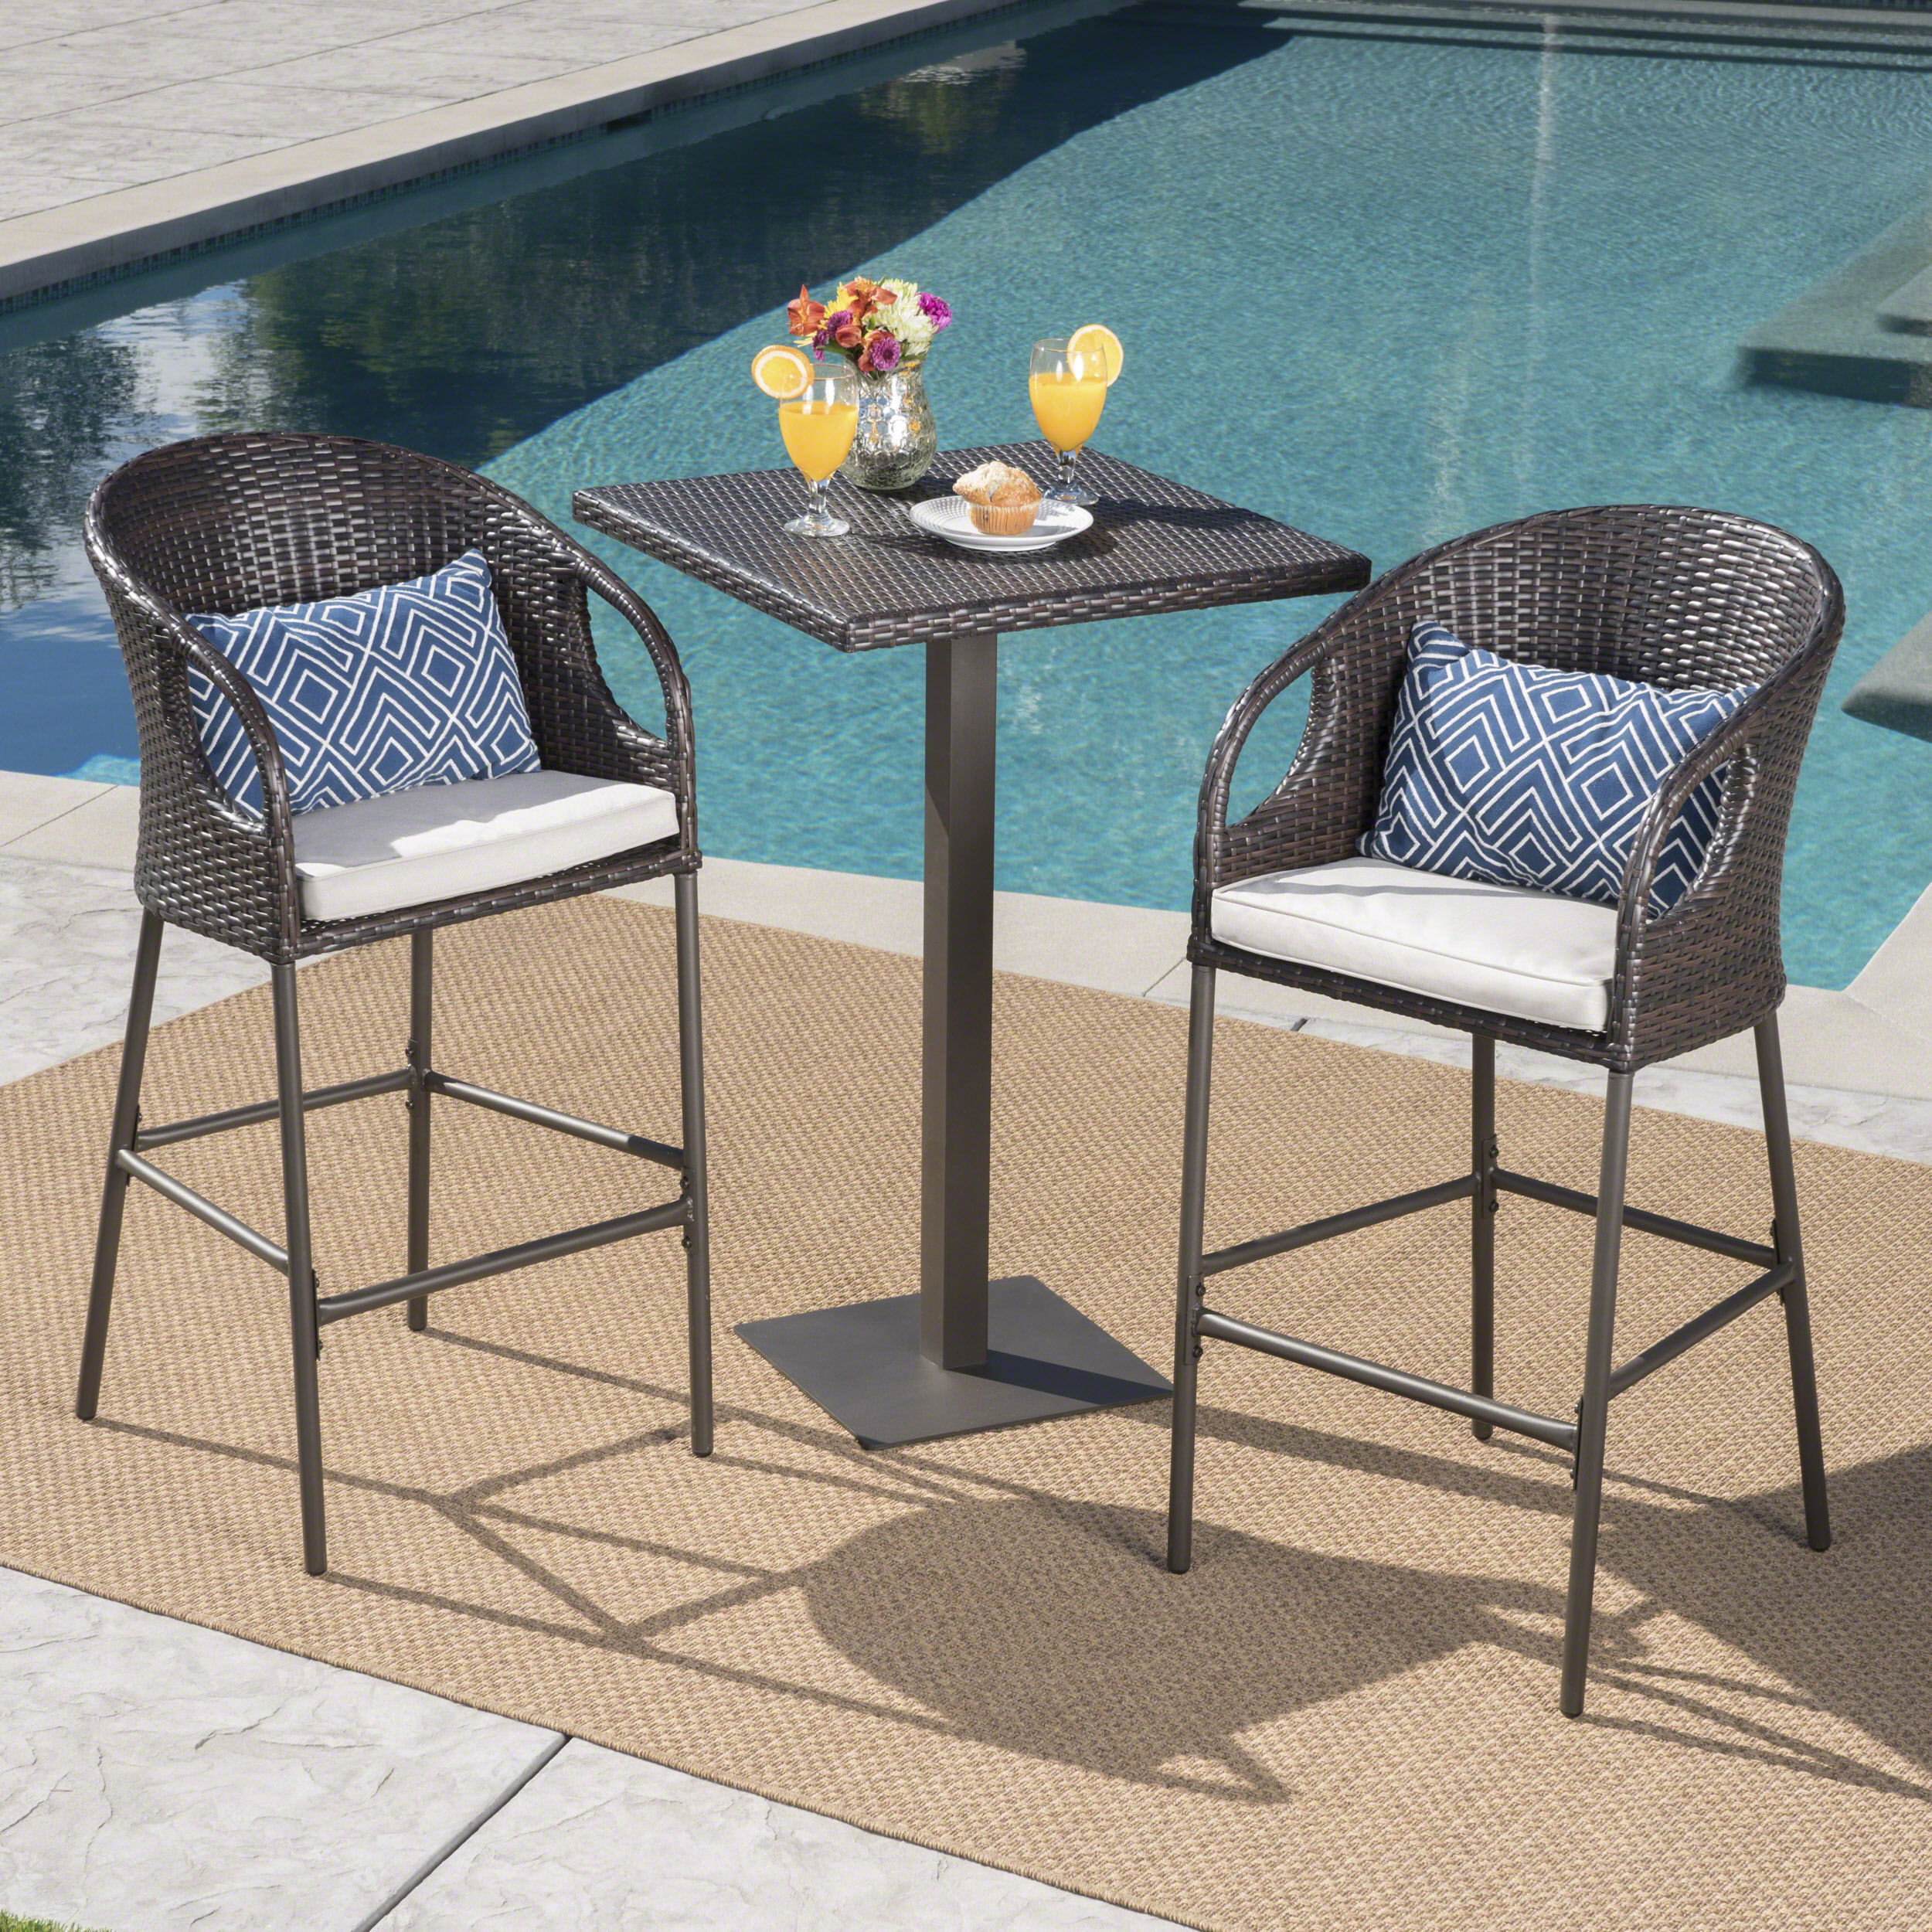 GDF Studio Mayhill Outdoor Wicker 3 Piece Bistro Bar Set with Cushion, Multibrown and Light Brown - image 2 of 13